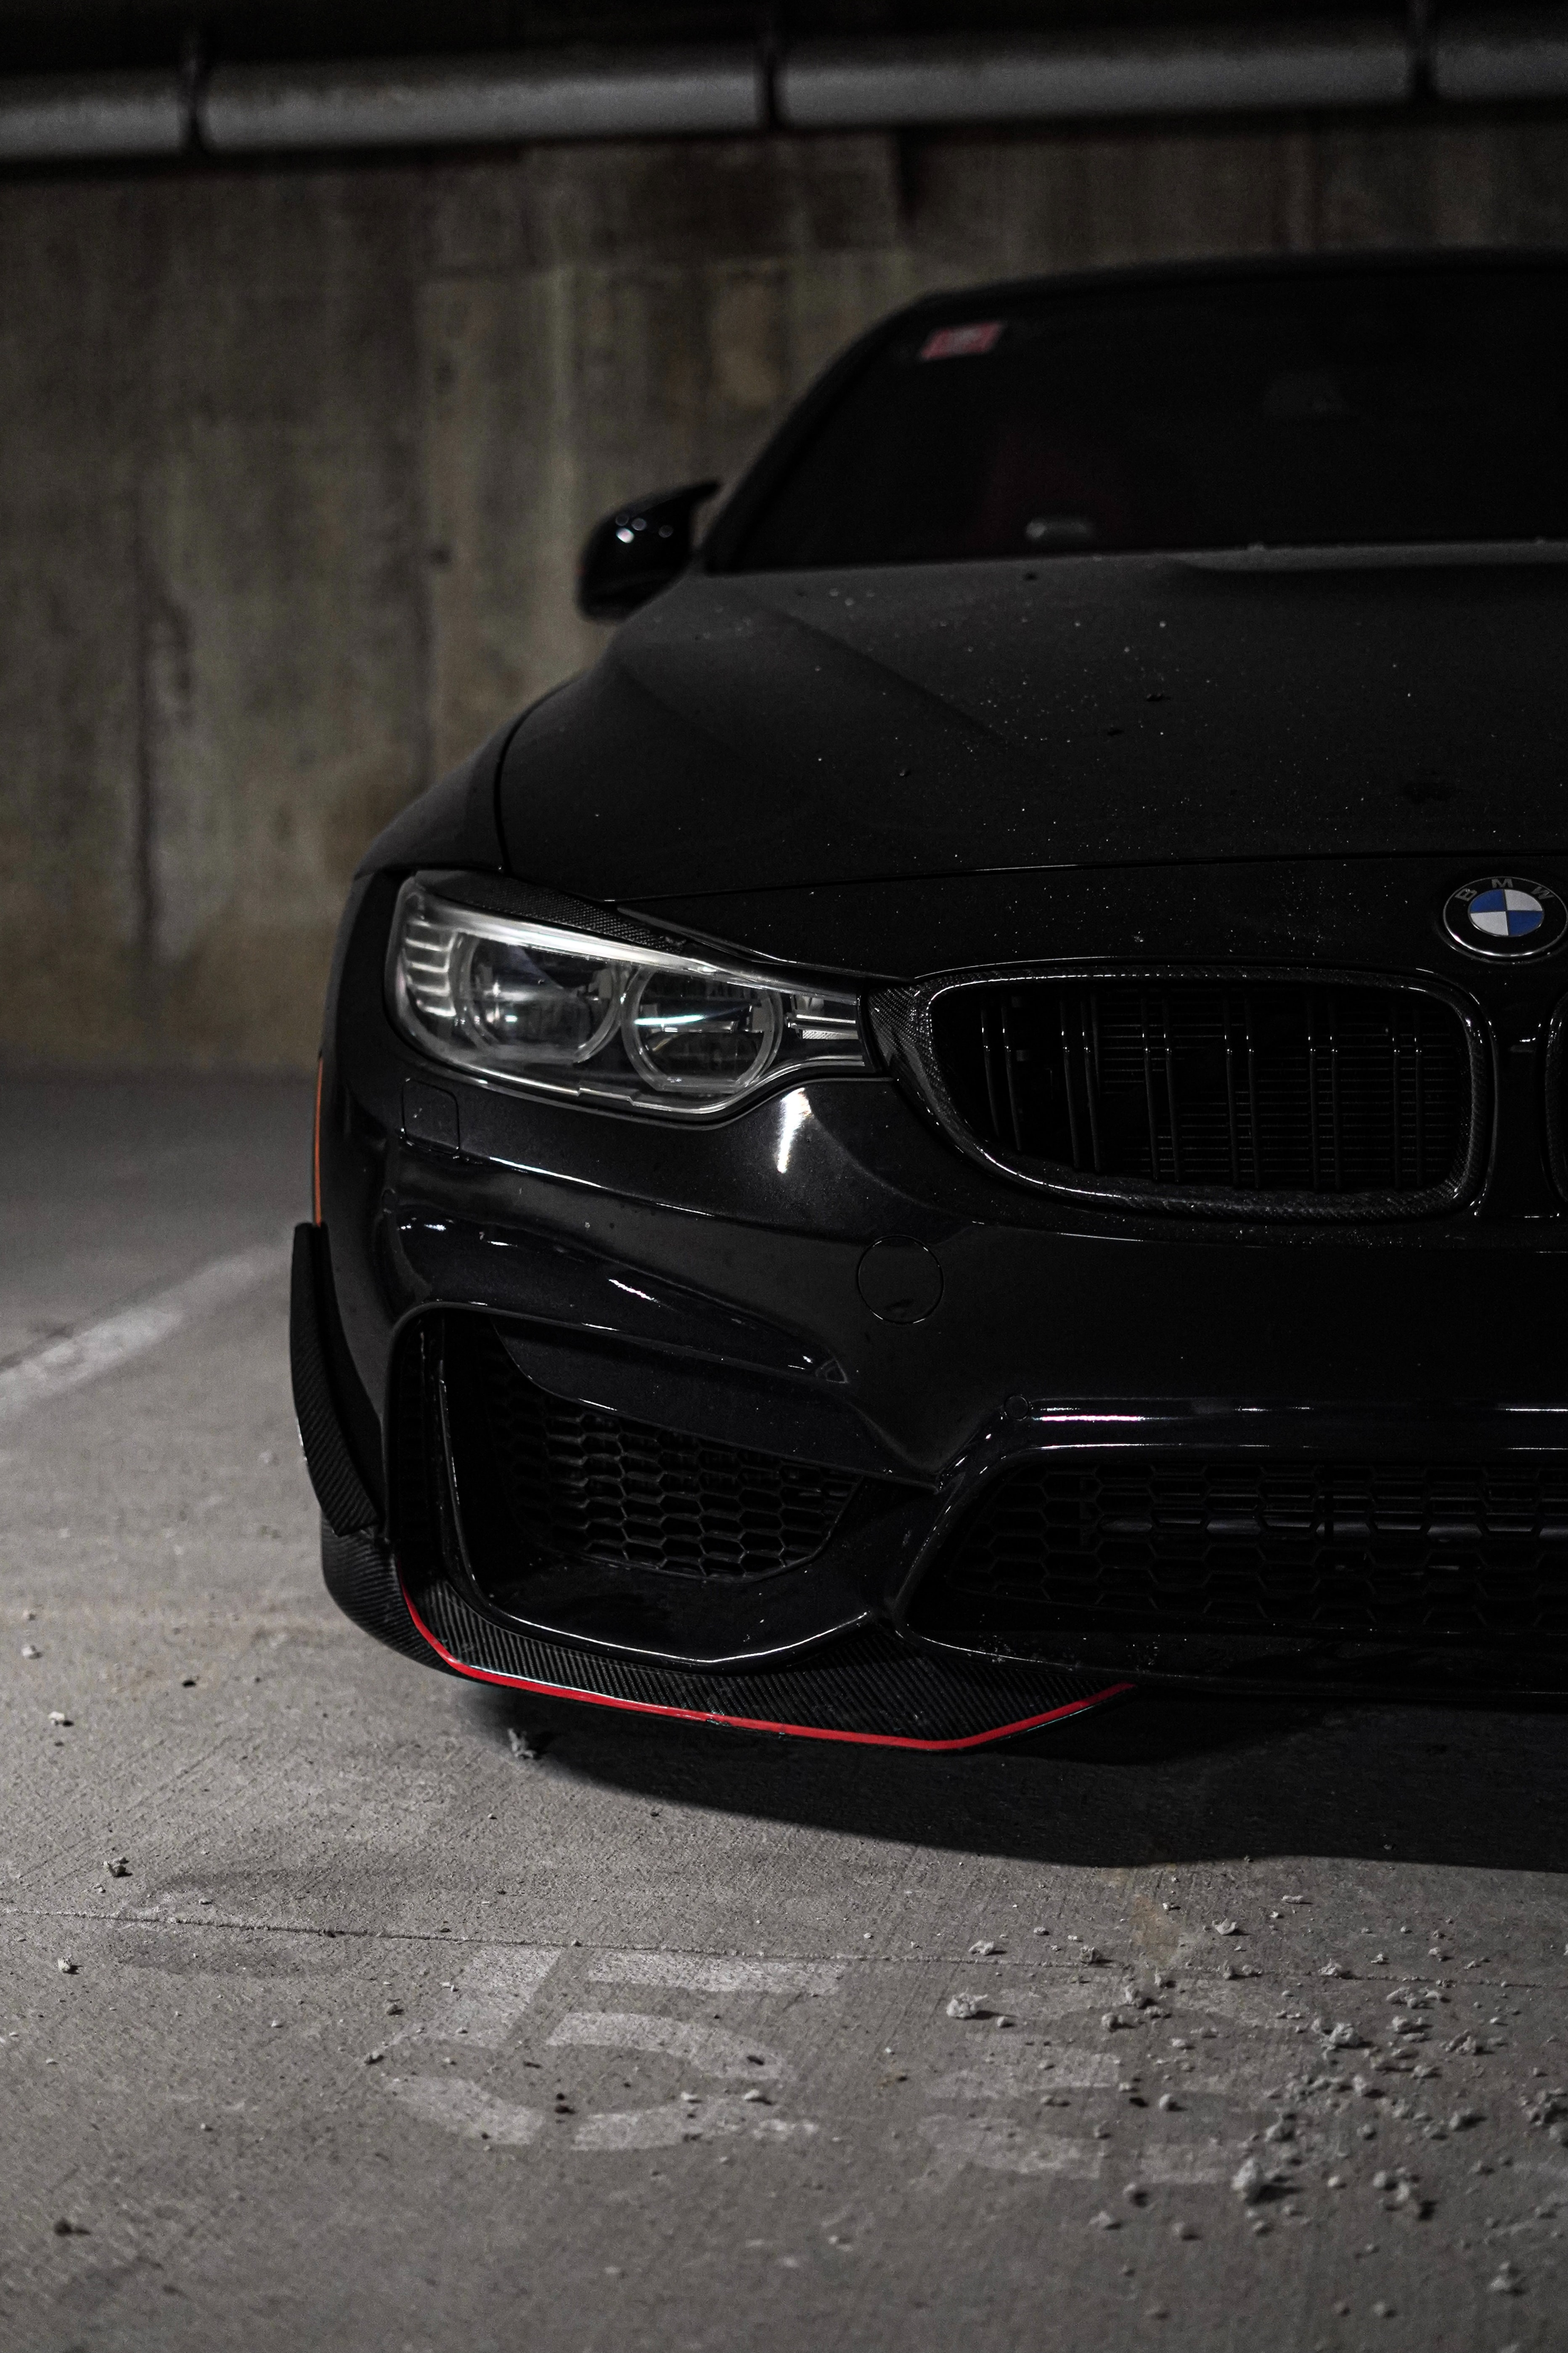 bmw, cars, black, car, front view, headlight cellphone